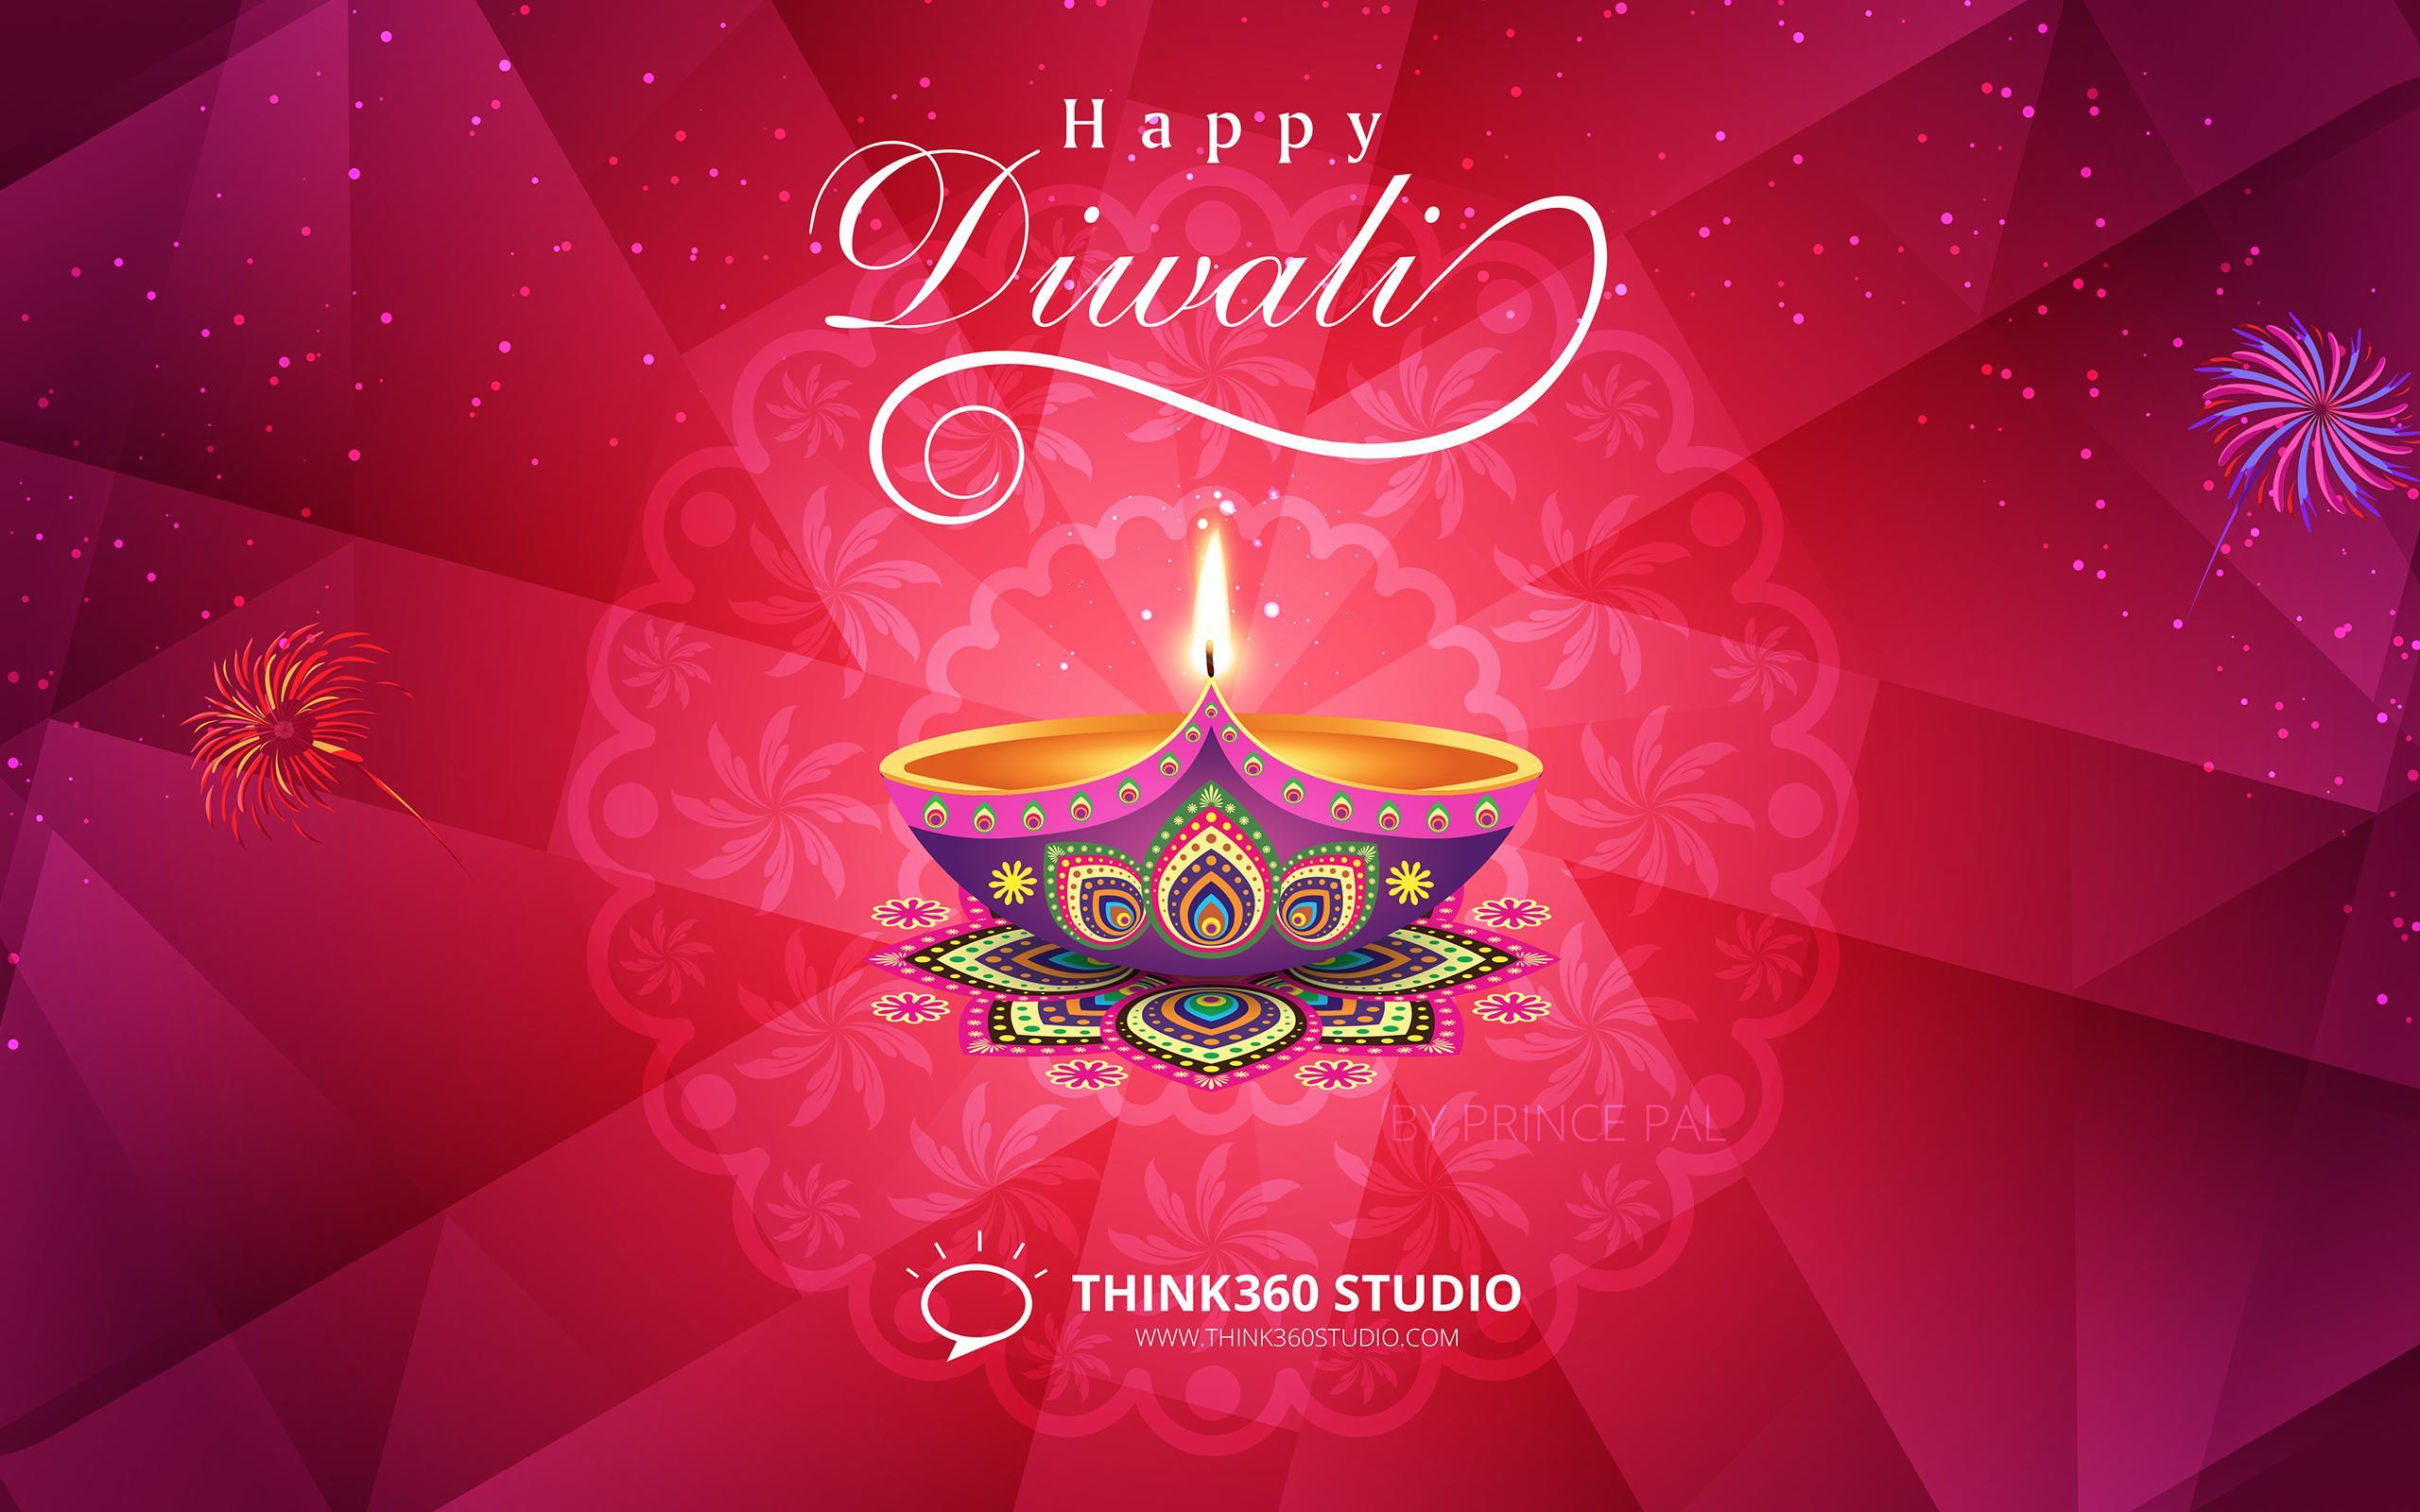 Happy Diwali 2019: Wishes Image, Wallpaper, Quotes, SMS